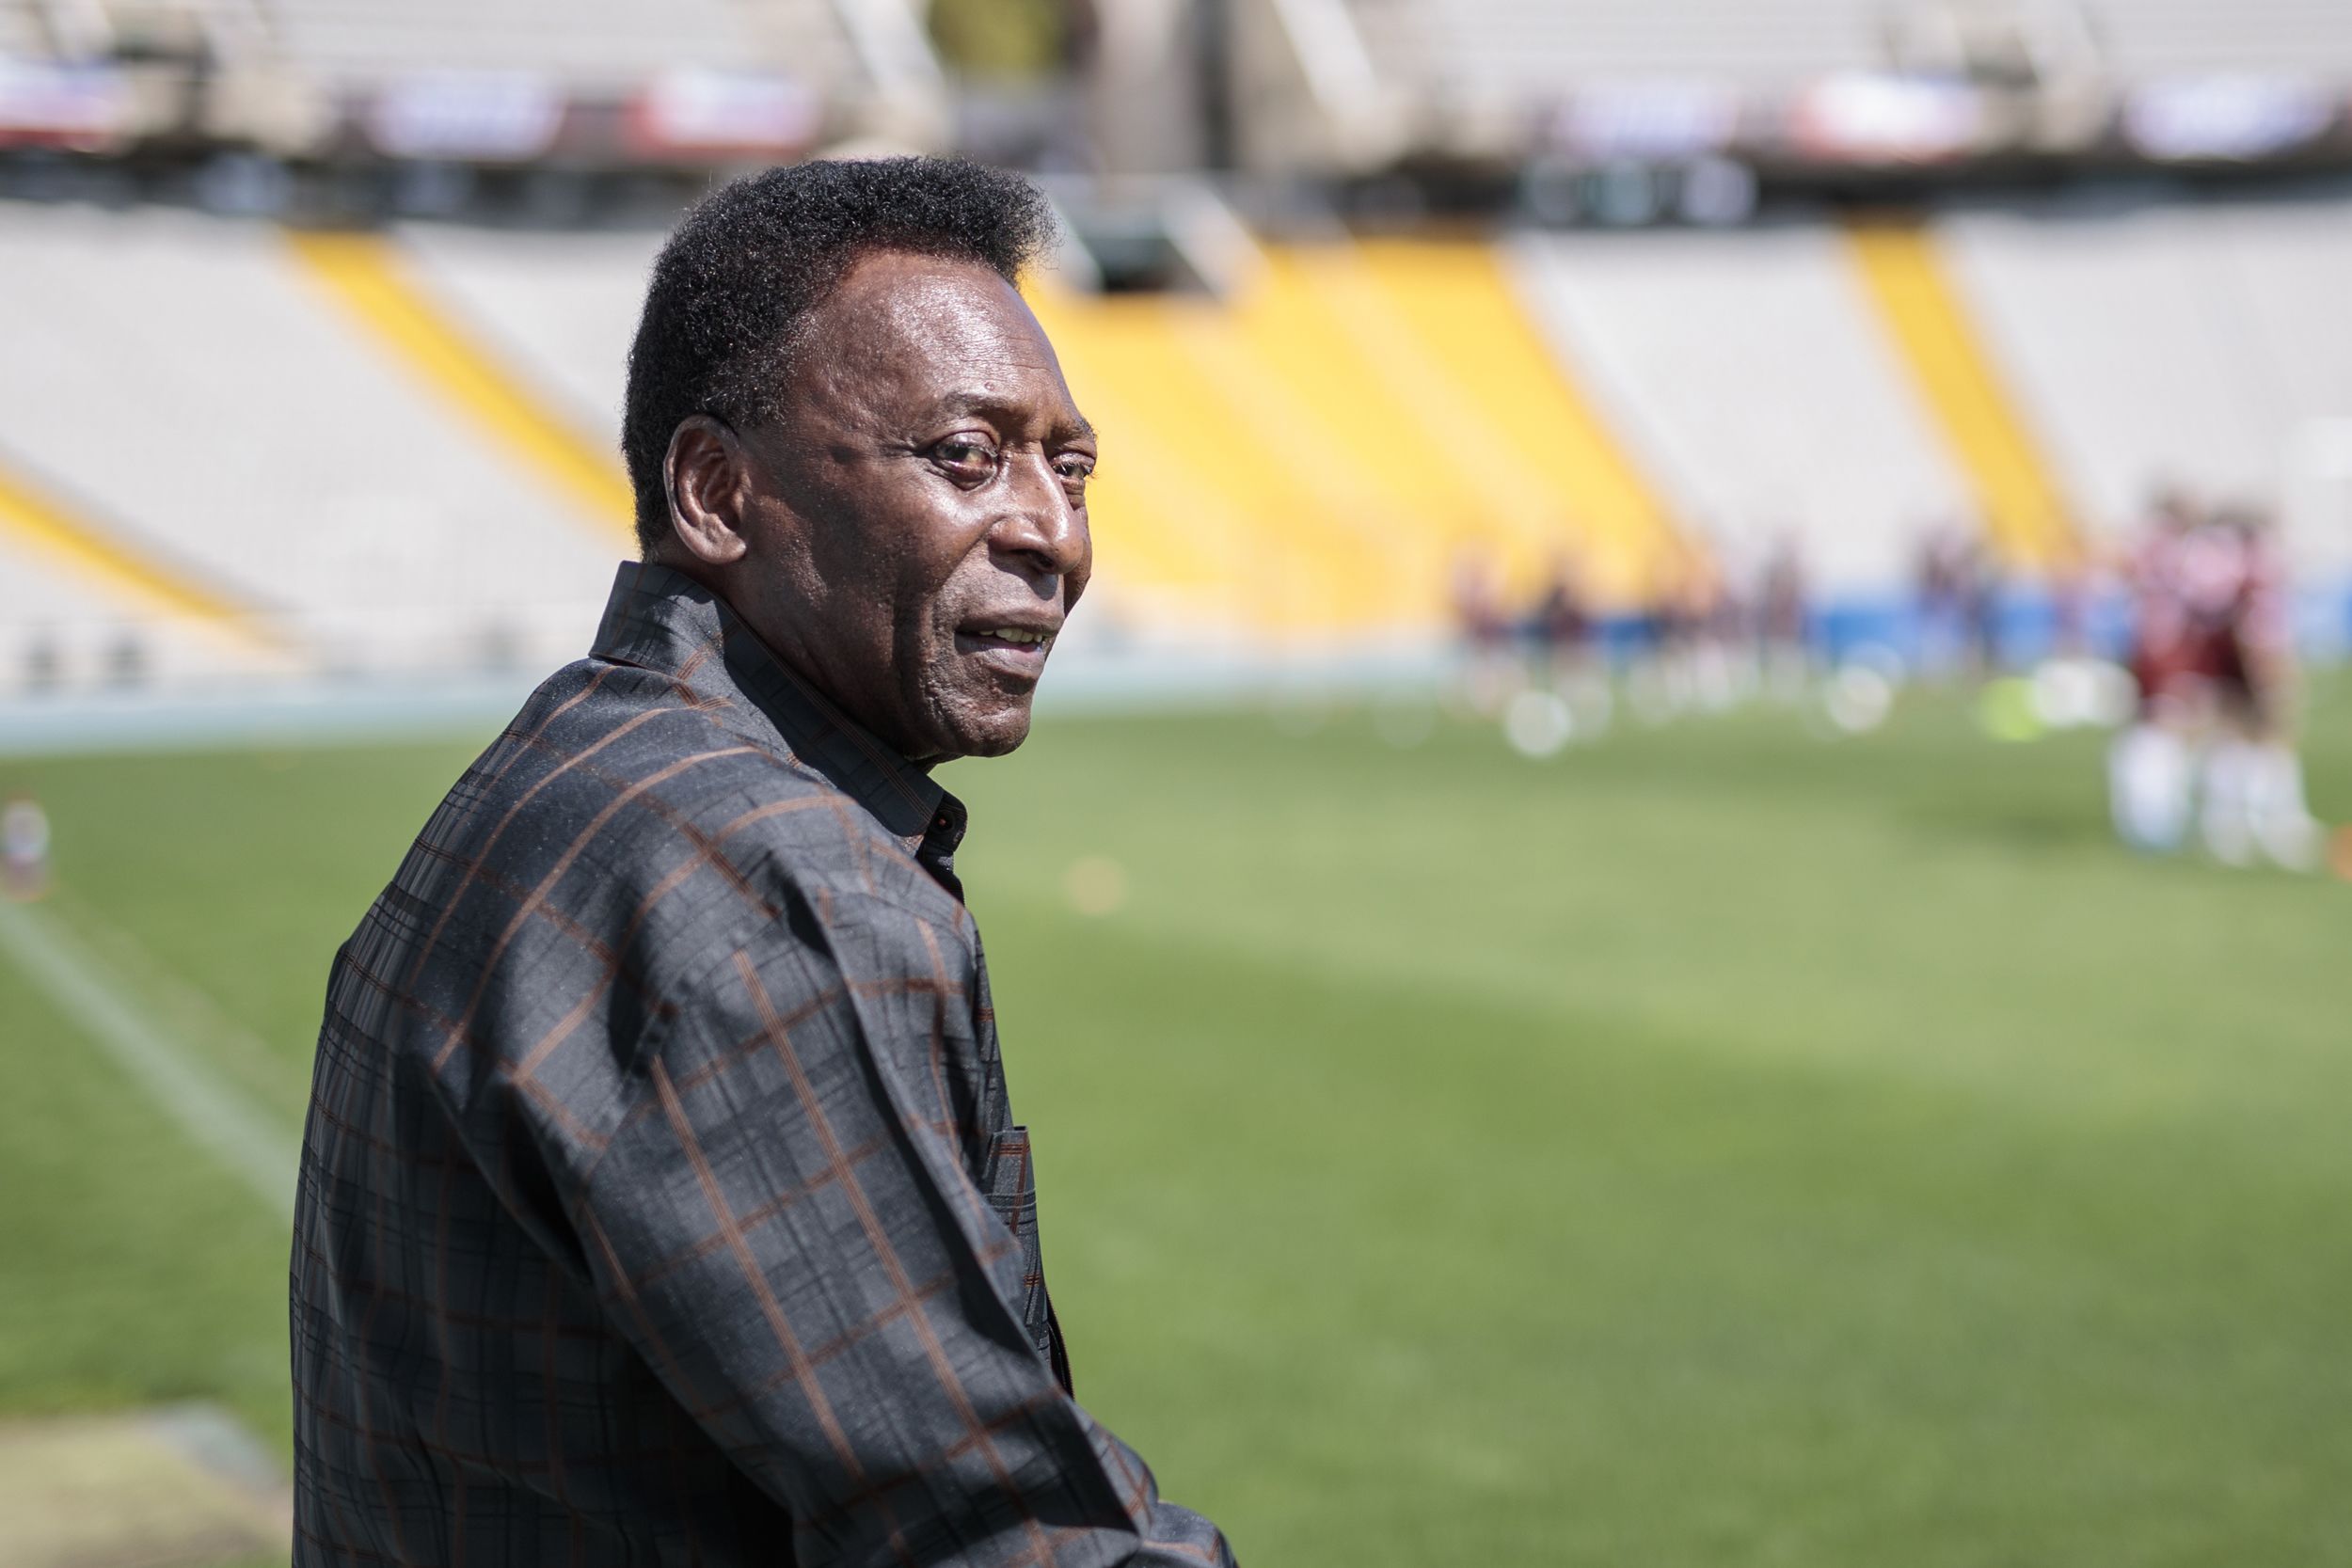 Pelé says goodbye to his family, his condition rapidly deteriorates